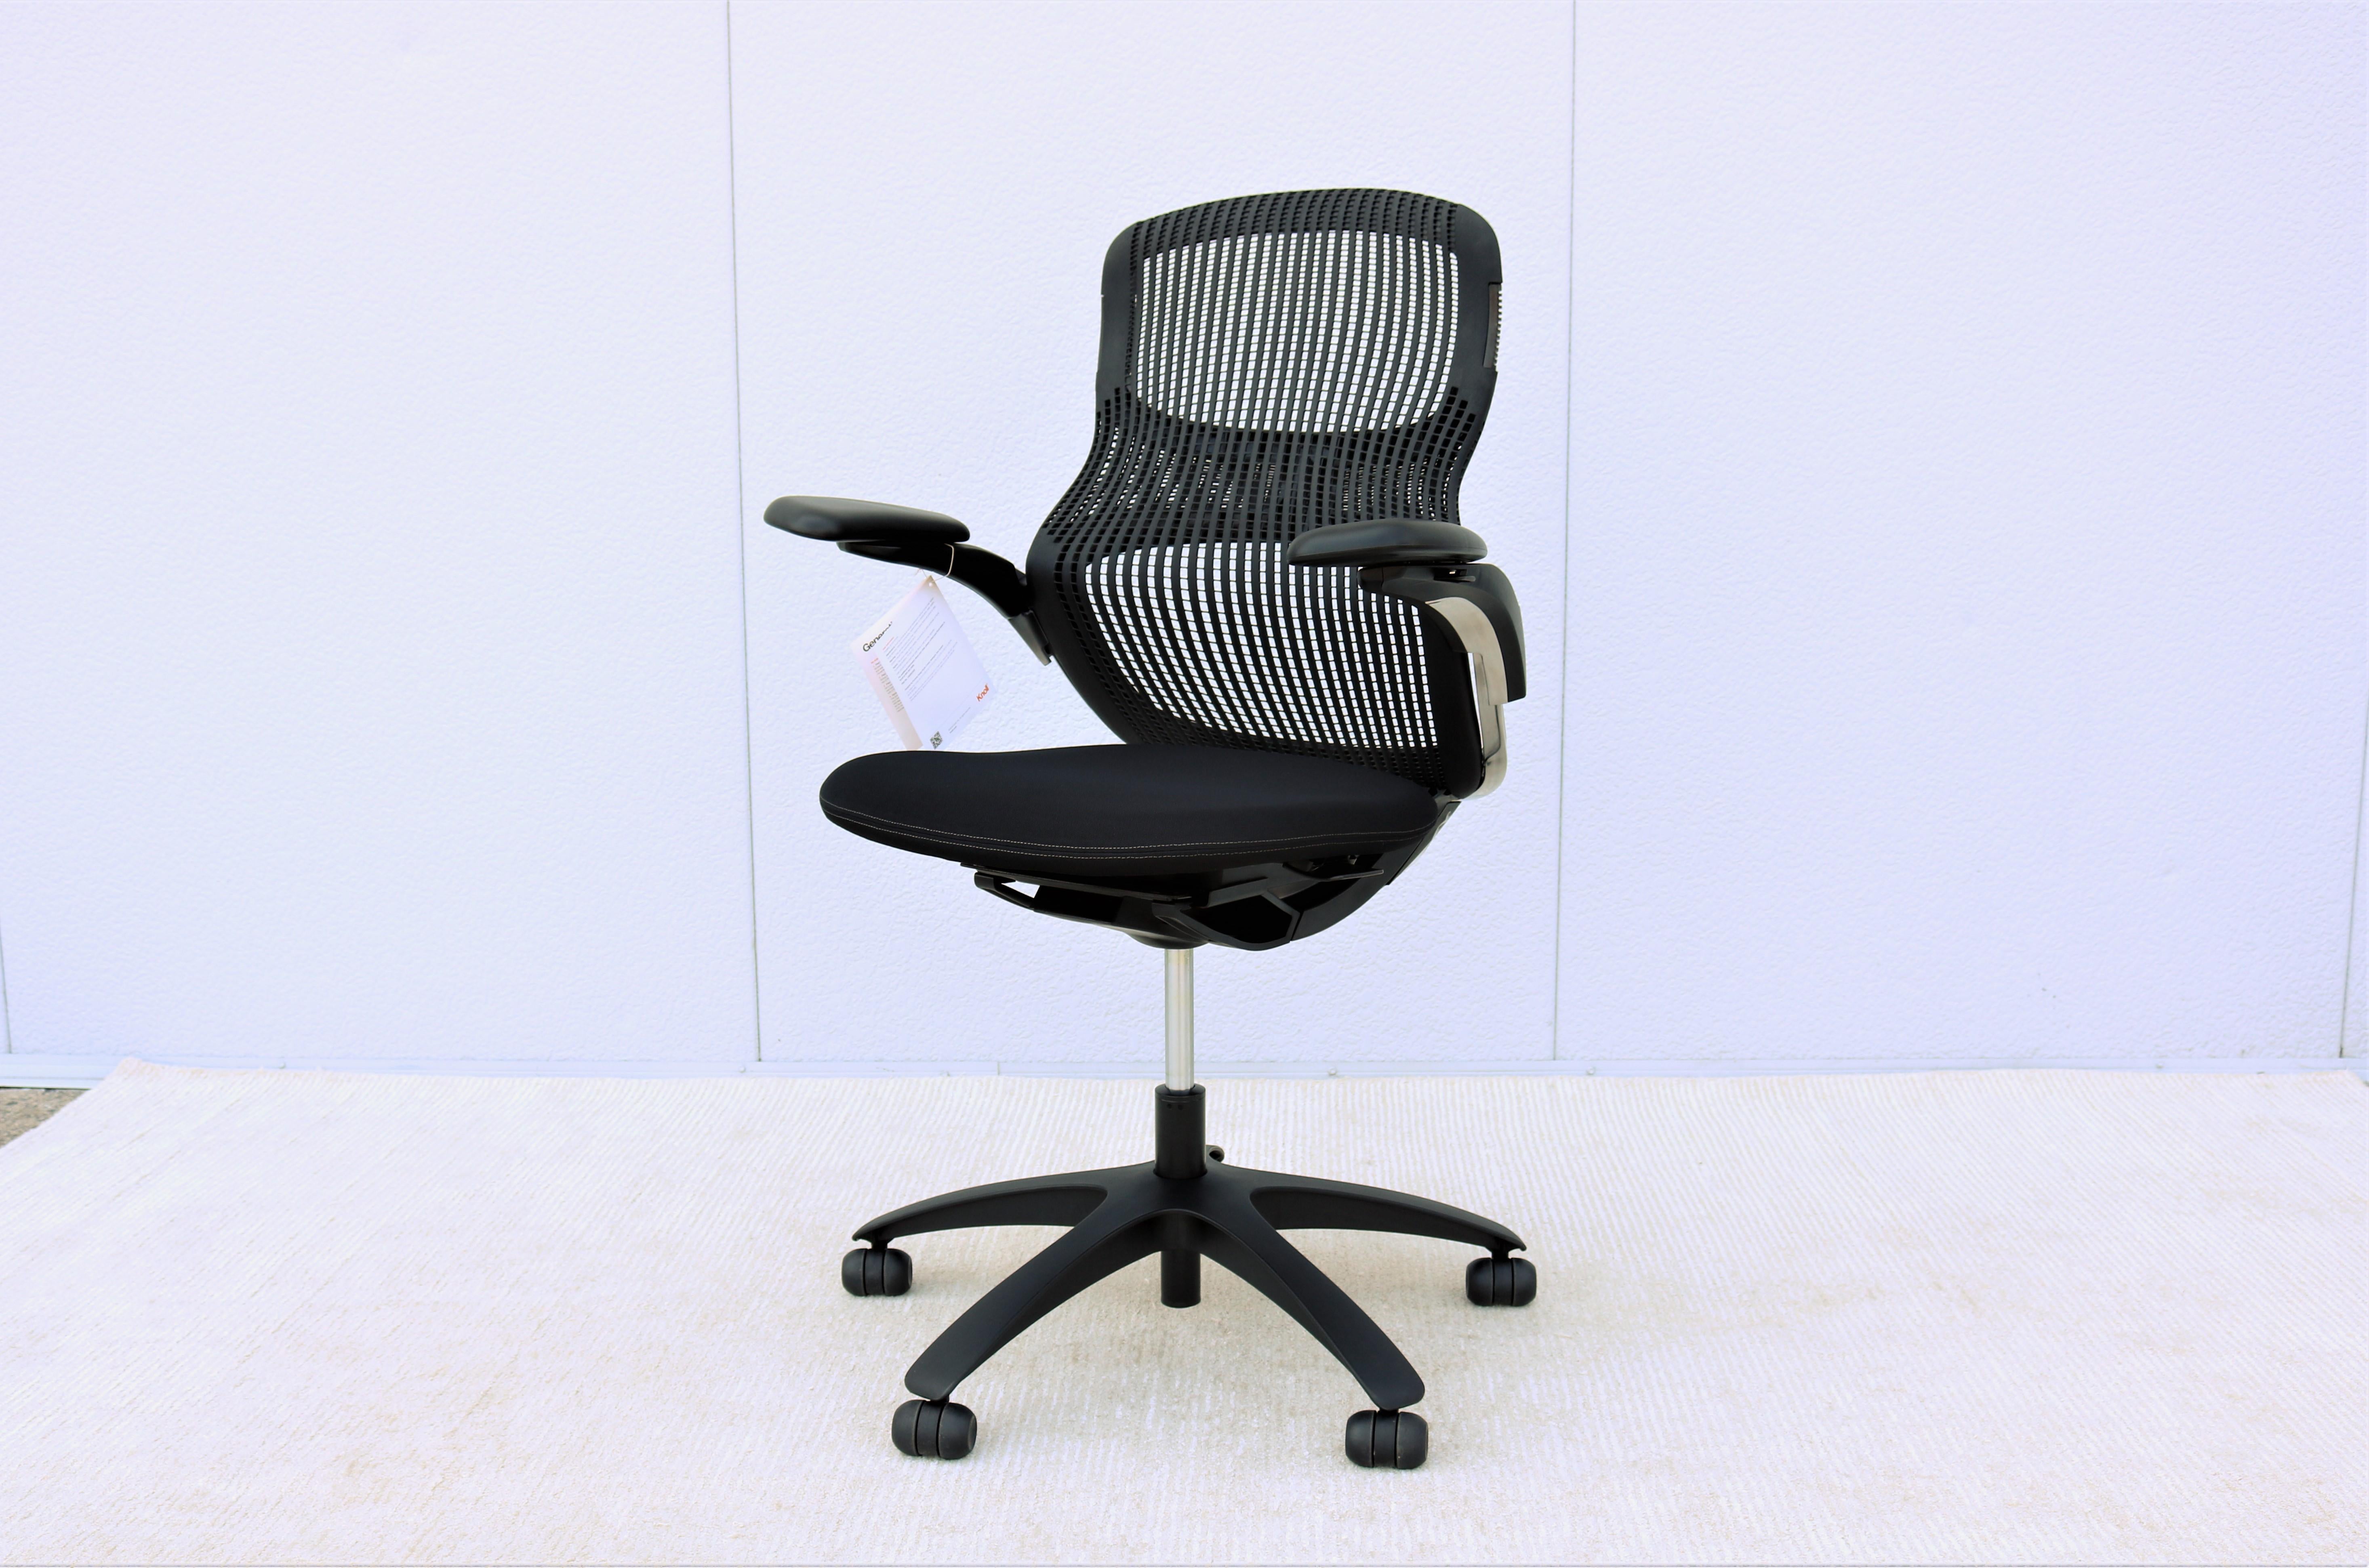 Painted Knoll Generation Black Ergonomic Office Desk Chair Fully Adjustable, Brand New For Sale